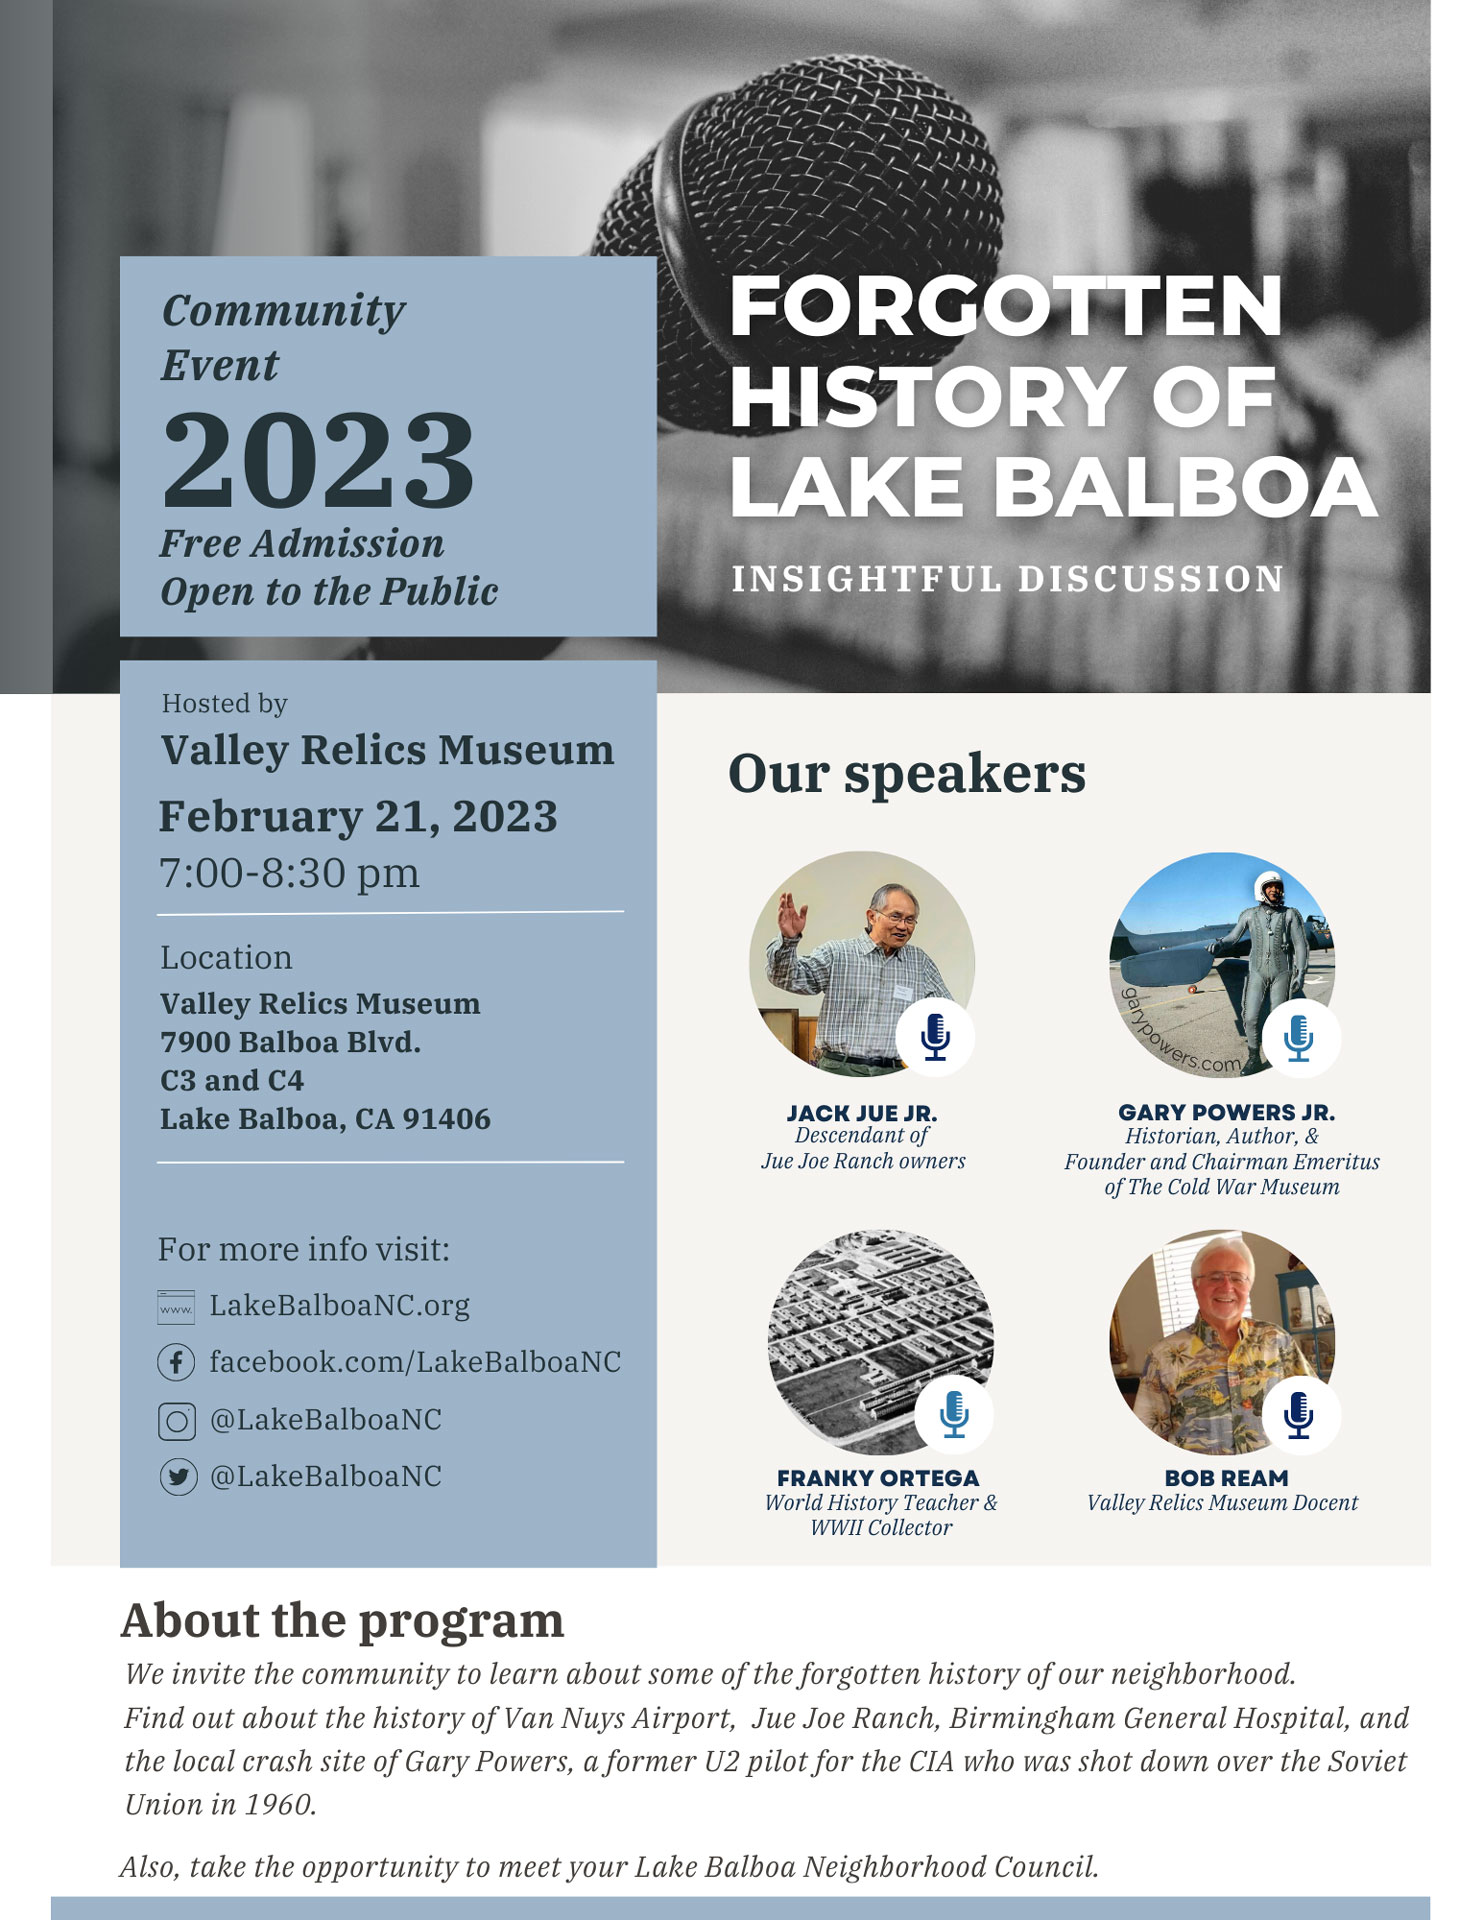 We invite the community to learn about some of the forgotten history of our neighborhood. Find out about the history of Van Nuys Airport, Jue Joe Ranch, Birmingham General Hospital, and the local crash site of Gary Powers, a former U2 pilot for the CIA who was shot down over the Soviet Union in 1960.  Also, take the opportunity to meet your Lake Balboa Neighborhood Council. 